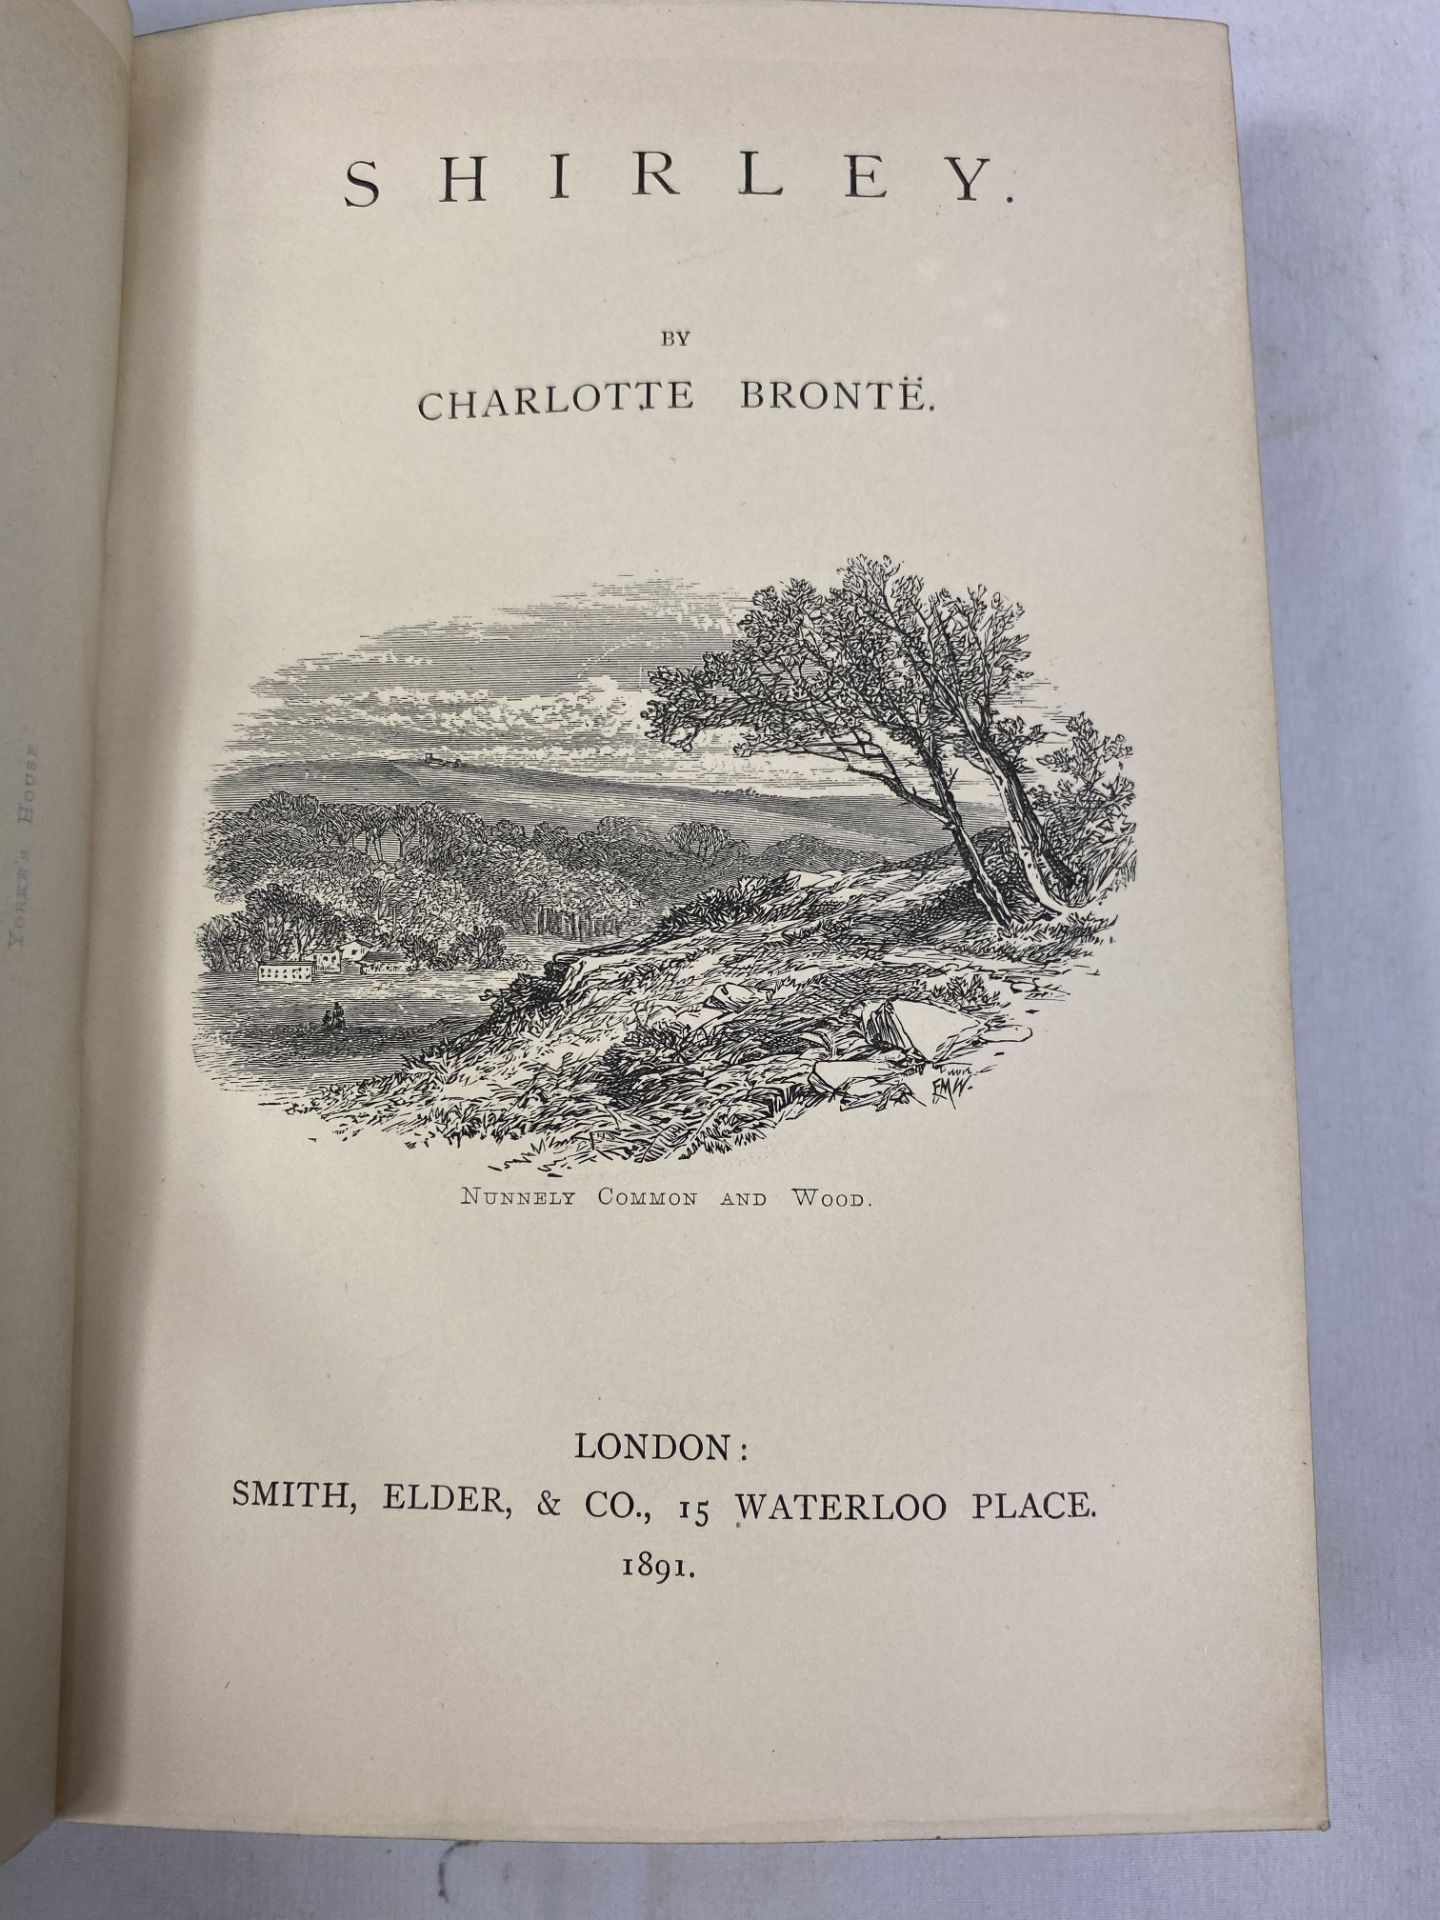 The Life and Works of Charlotte Bronte published and illustrated in seven half bound volumes - Image 4 of 9